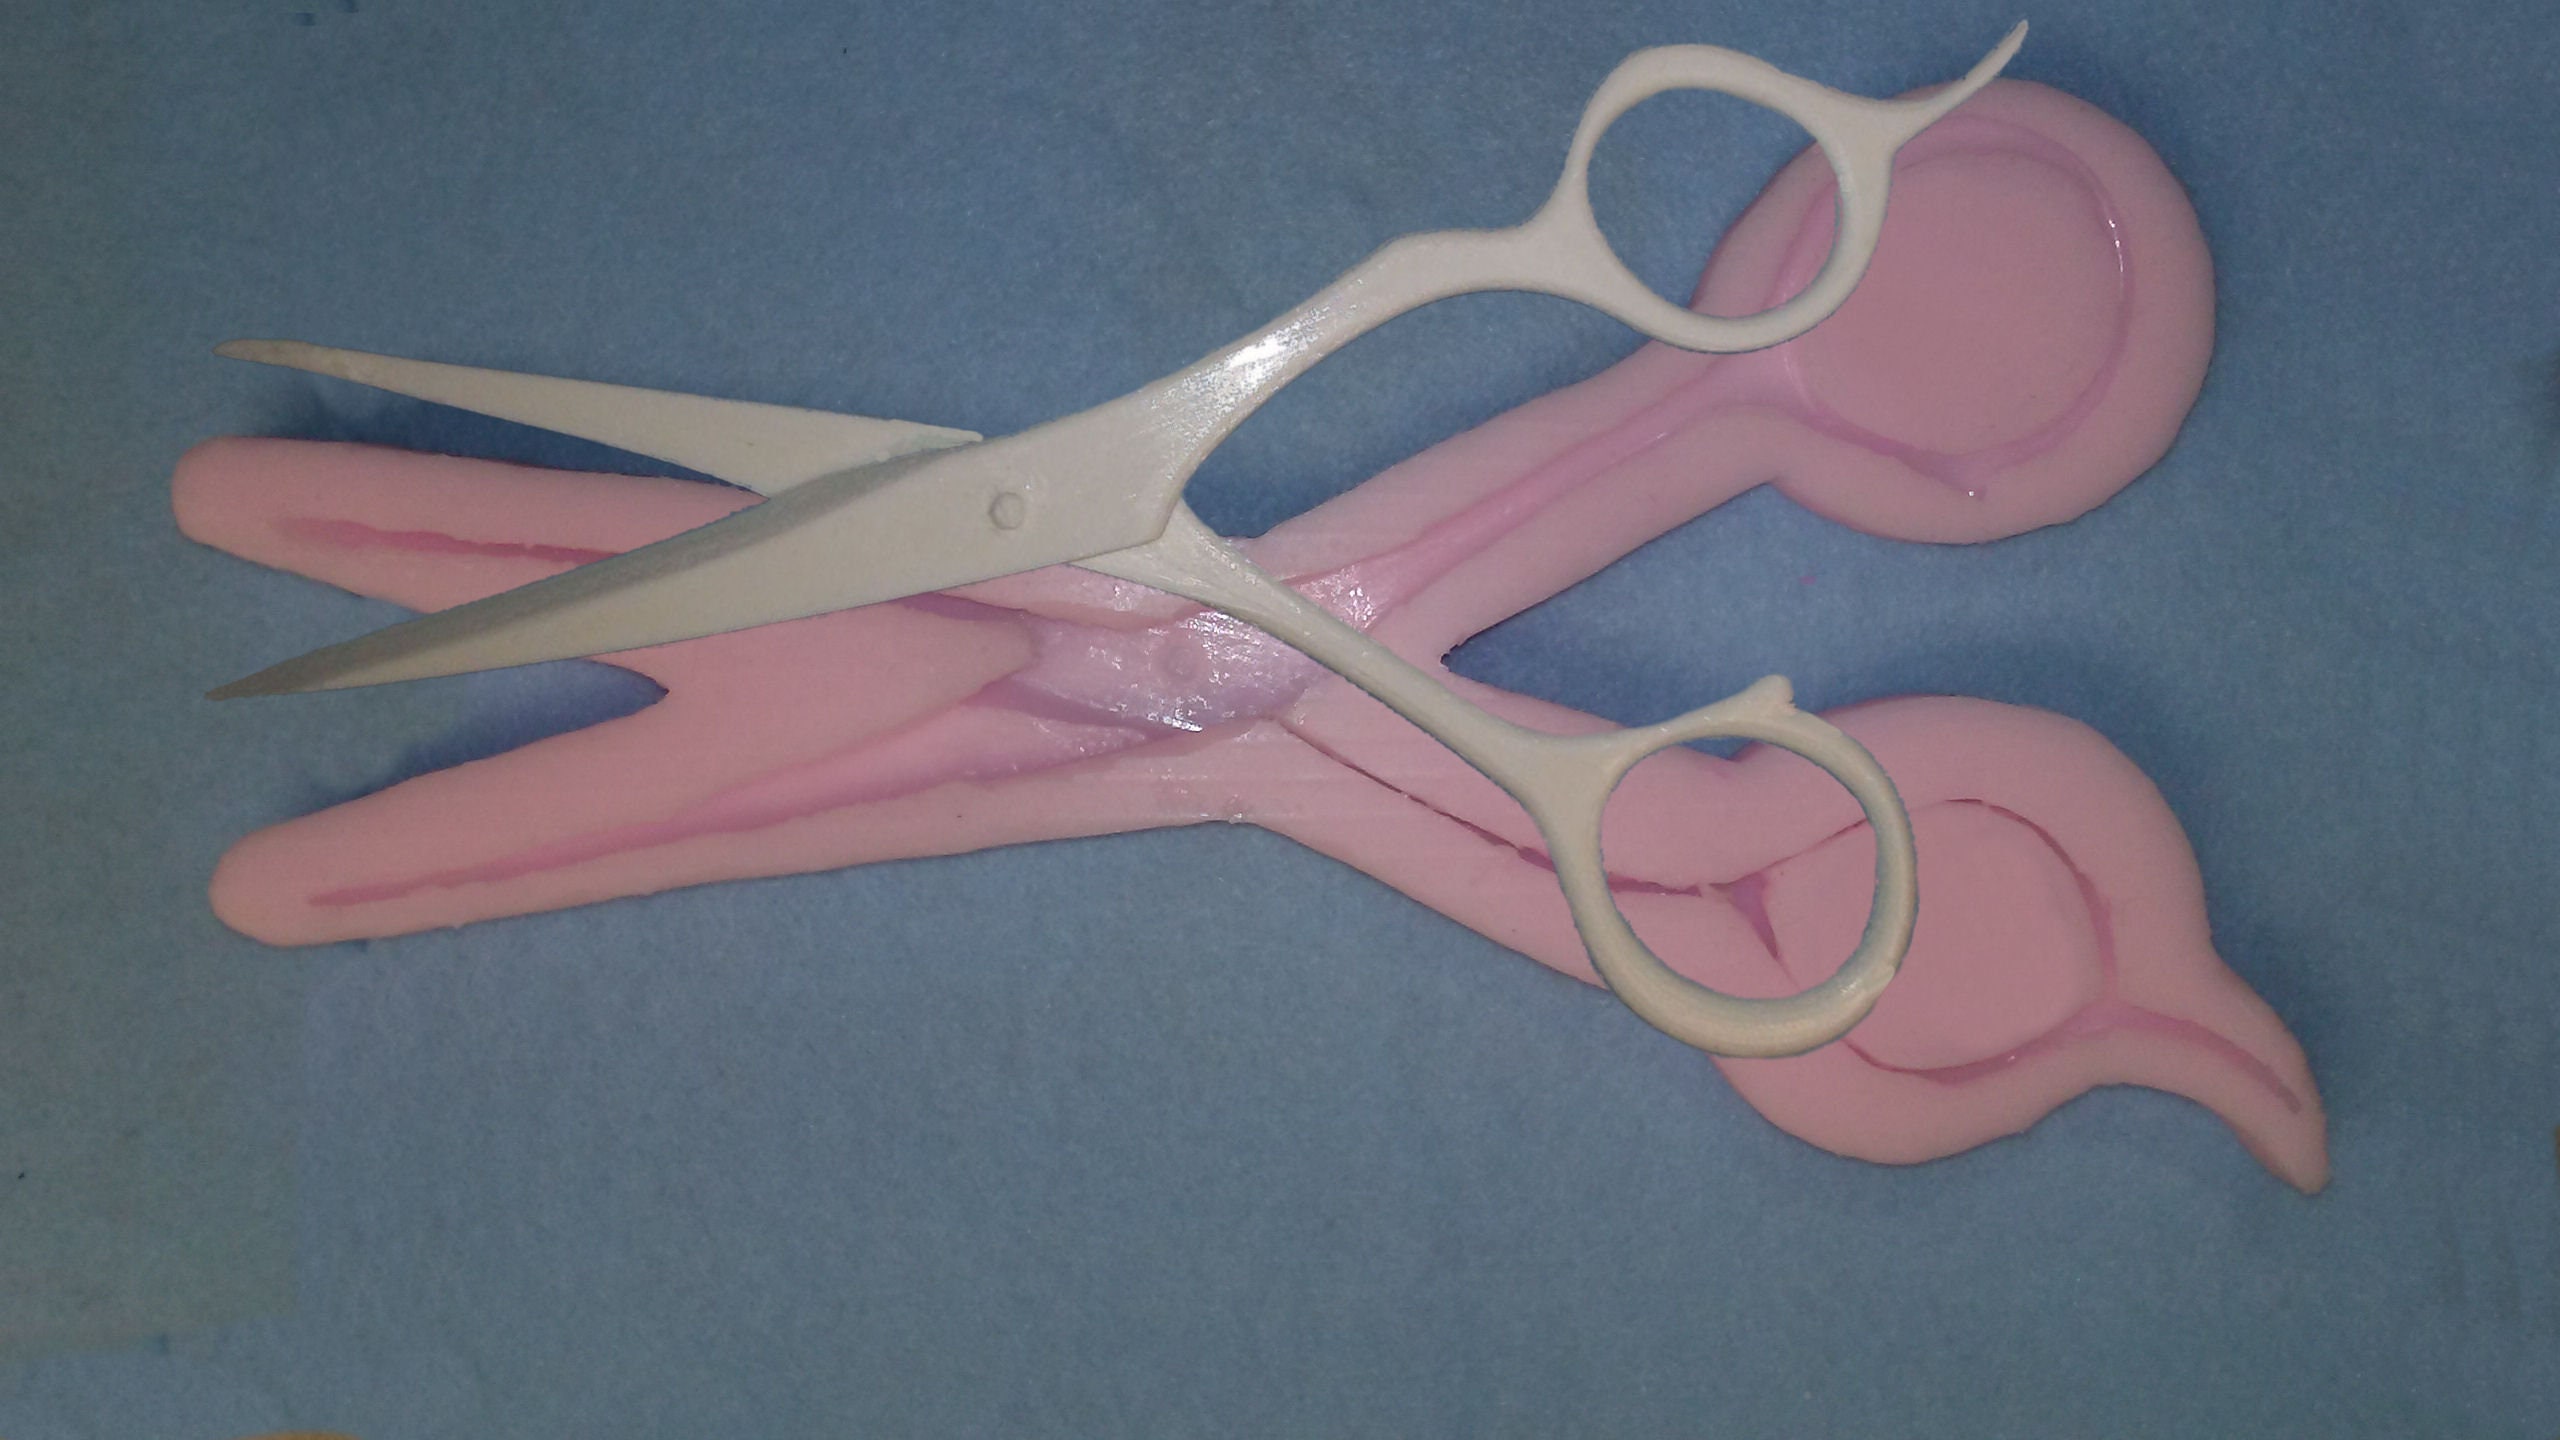 Craft Scissors with Lace Heads - Perfect for Decorative Trims – Glitzy Molds